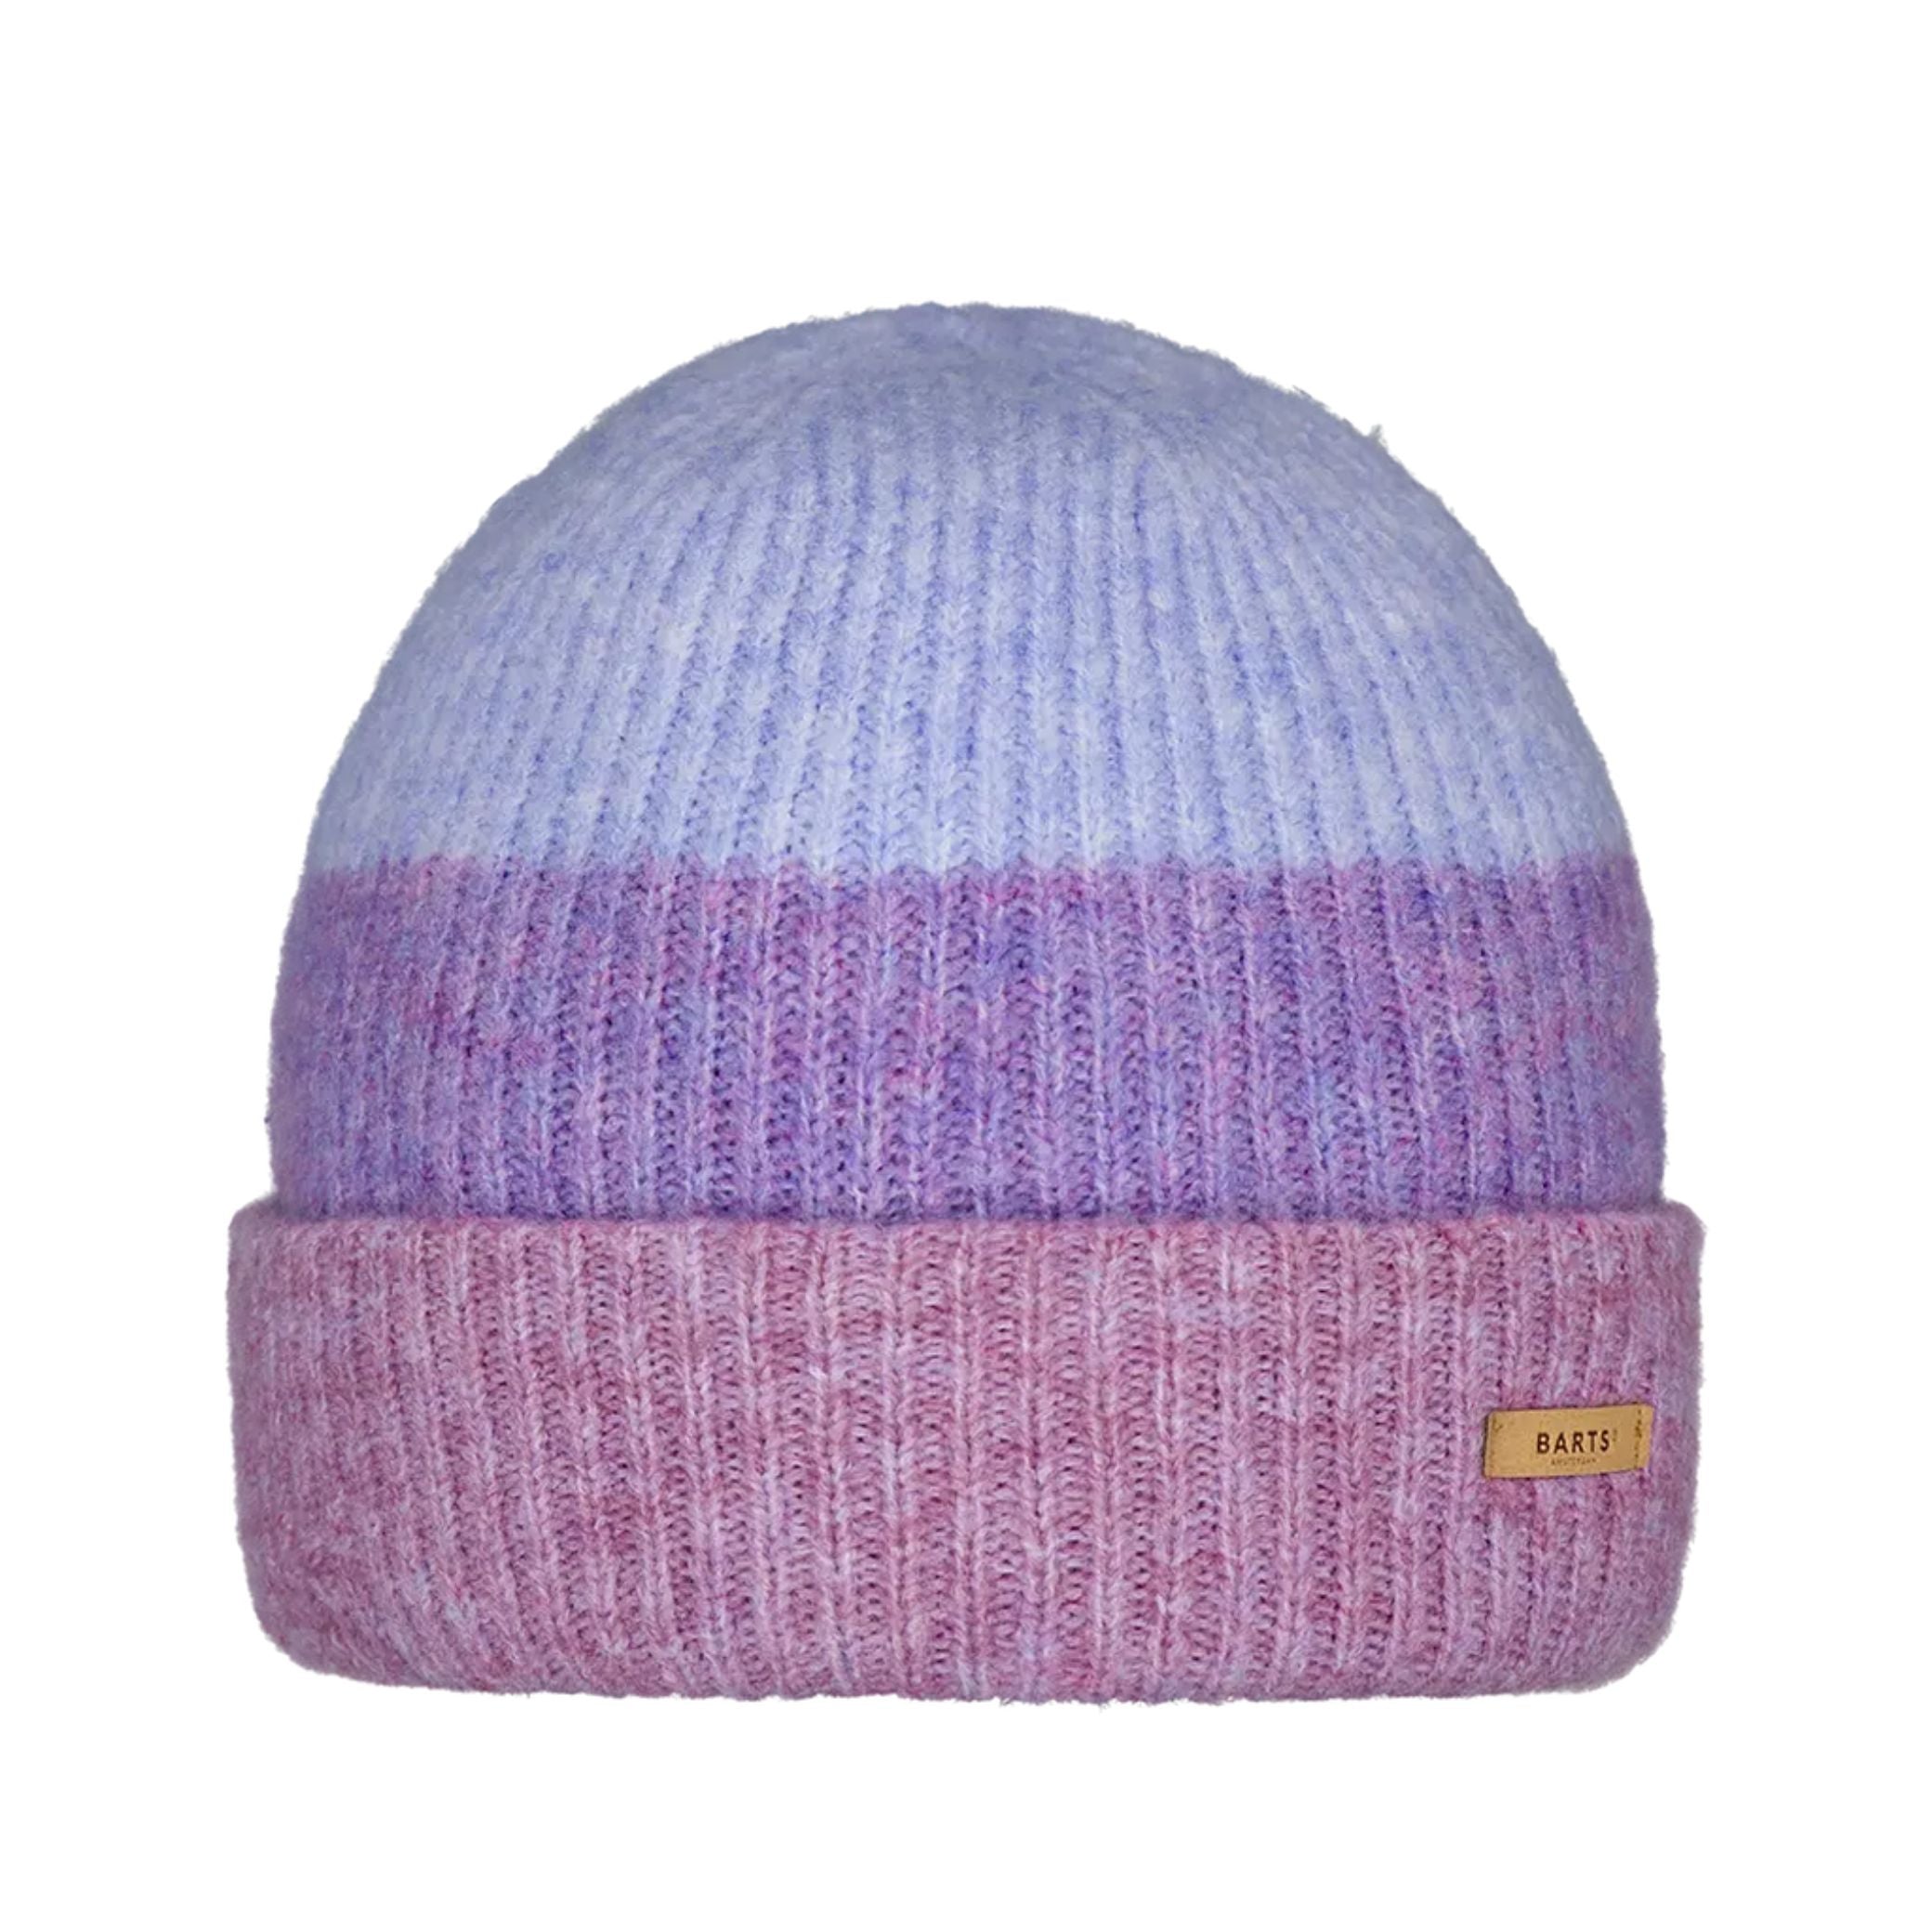 Barts Suzam Beanie | Portwest - The Outdoor Shop